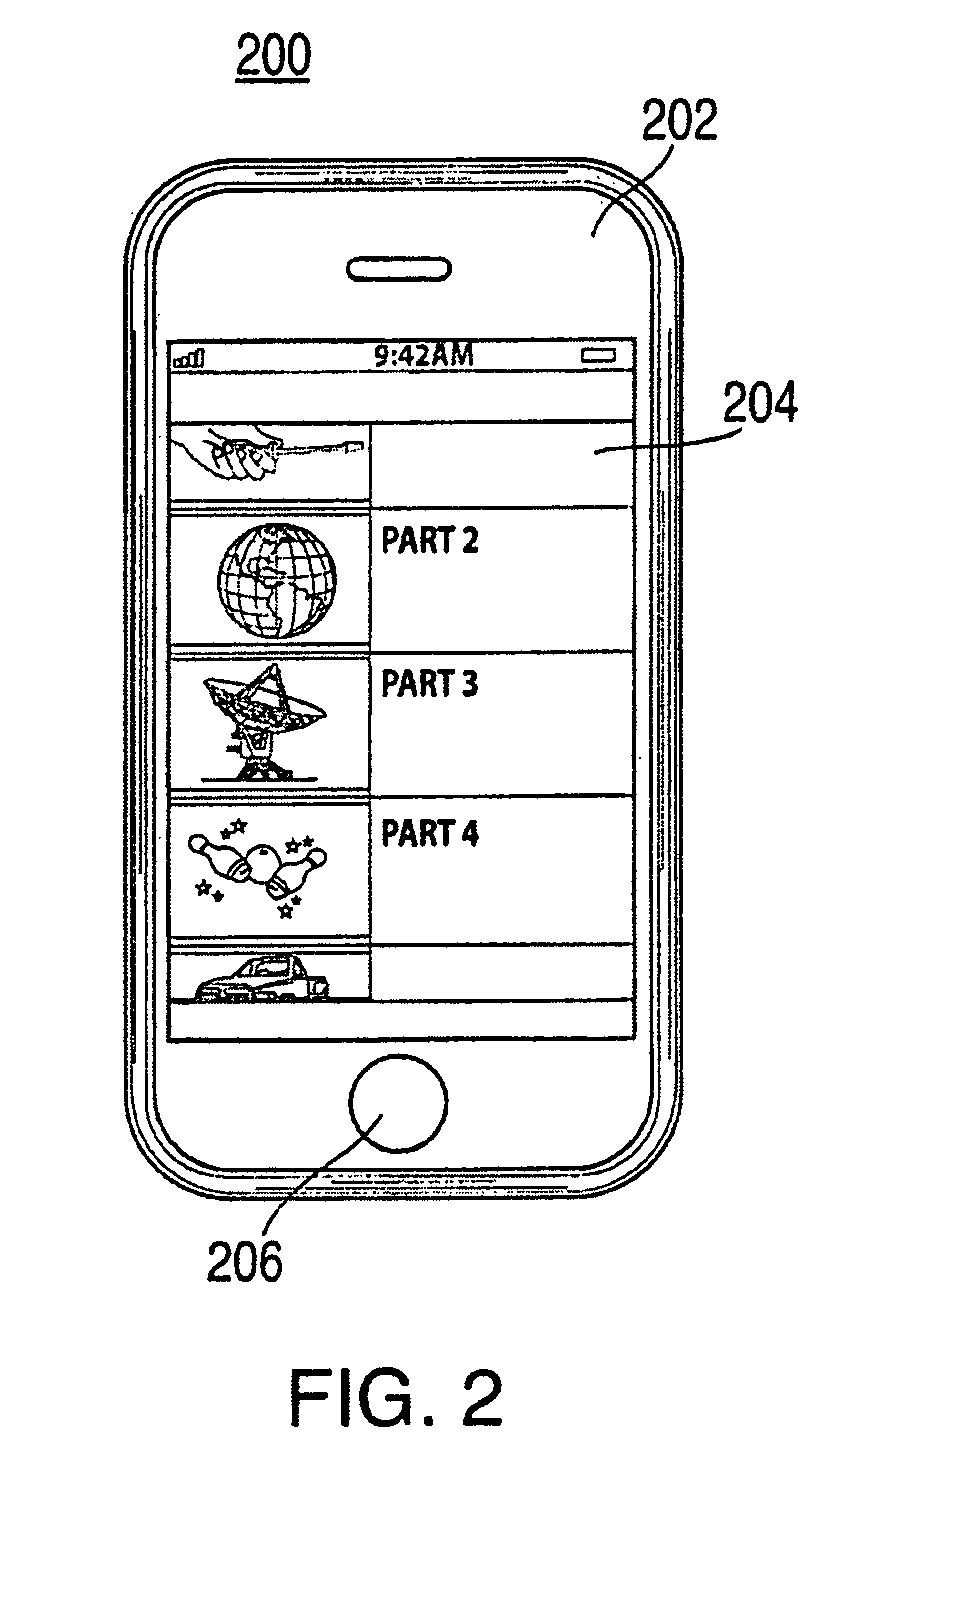 Systems and methods for identifying objects and providing information related to identified objects